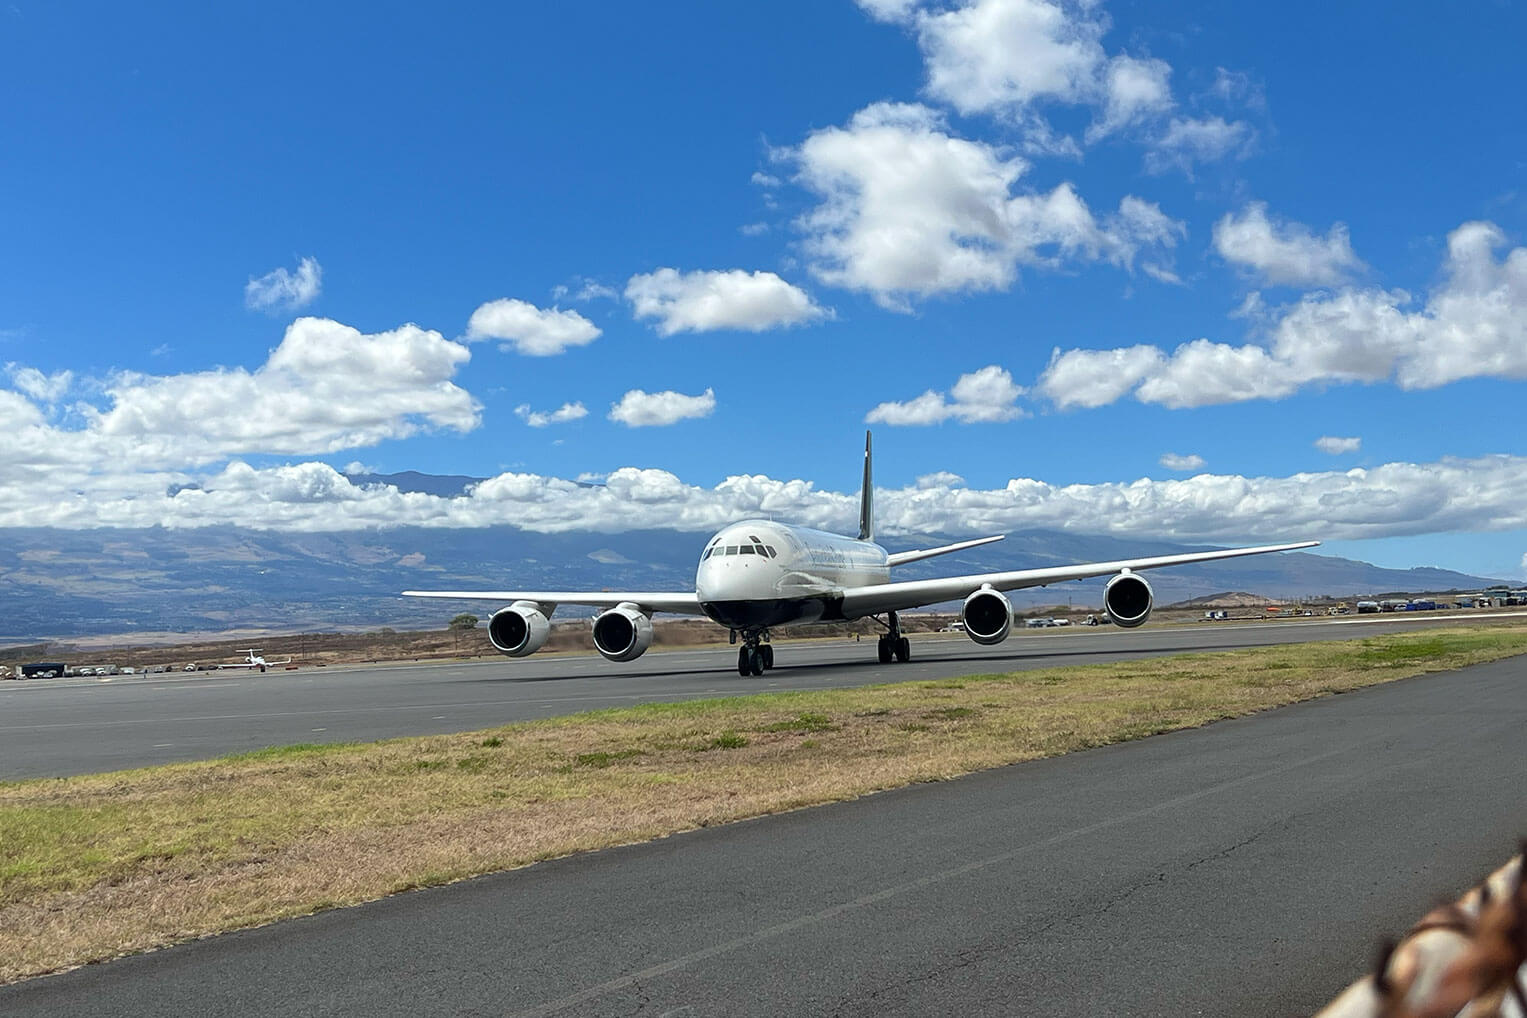 The Samaritan's Purse DC-8 cargo plane transported relief supplies and personnel to Hawaii after wildfire destroyed Maui communities.